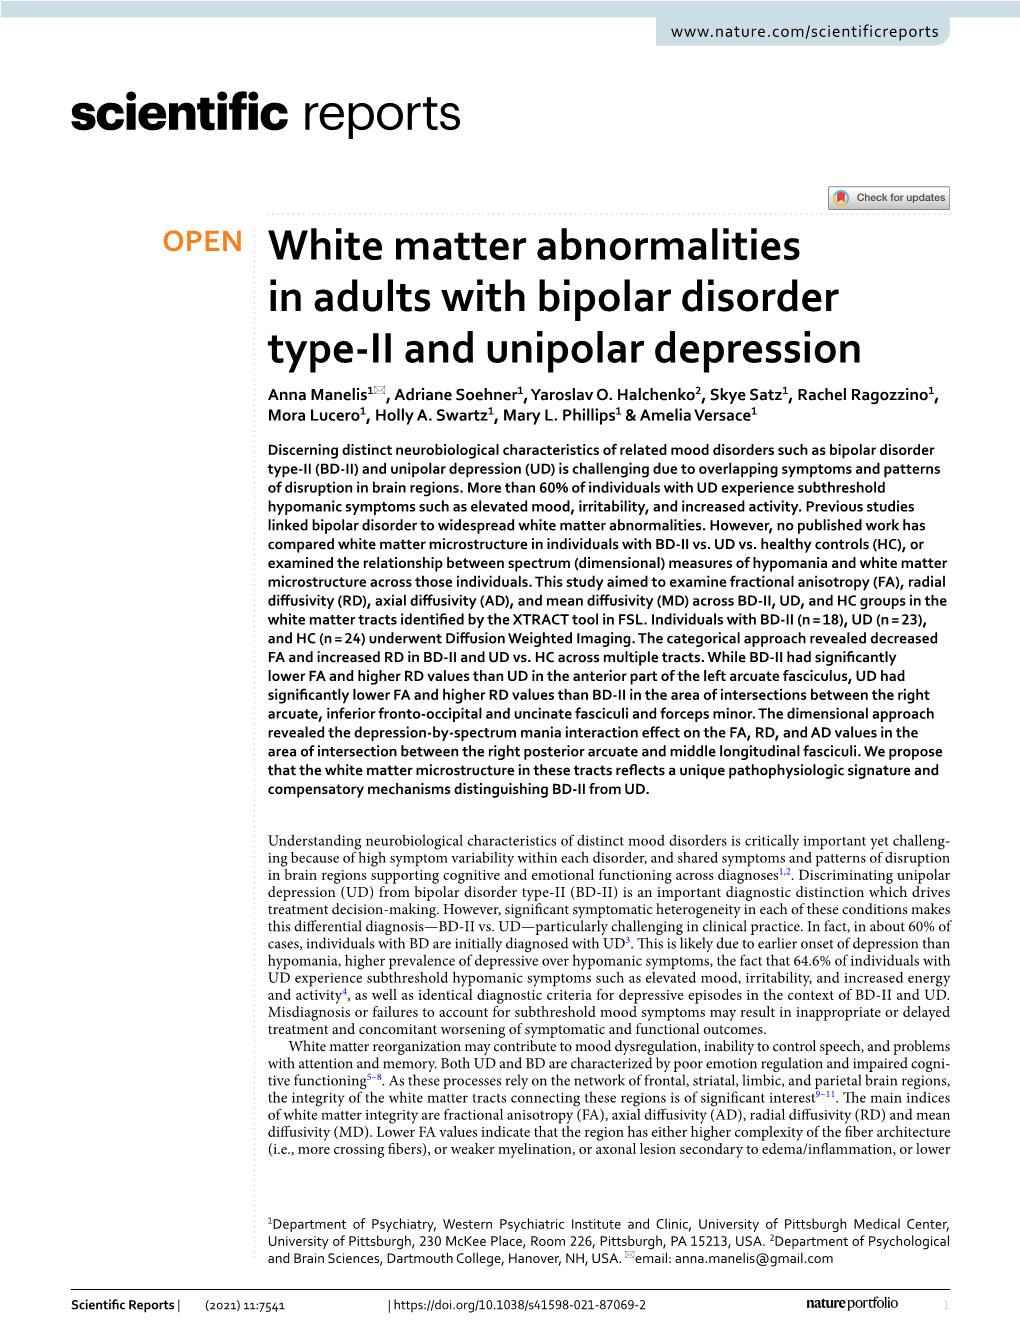 White Matter Abnormalities in Adults with Bipolar Disorder Type-II